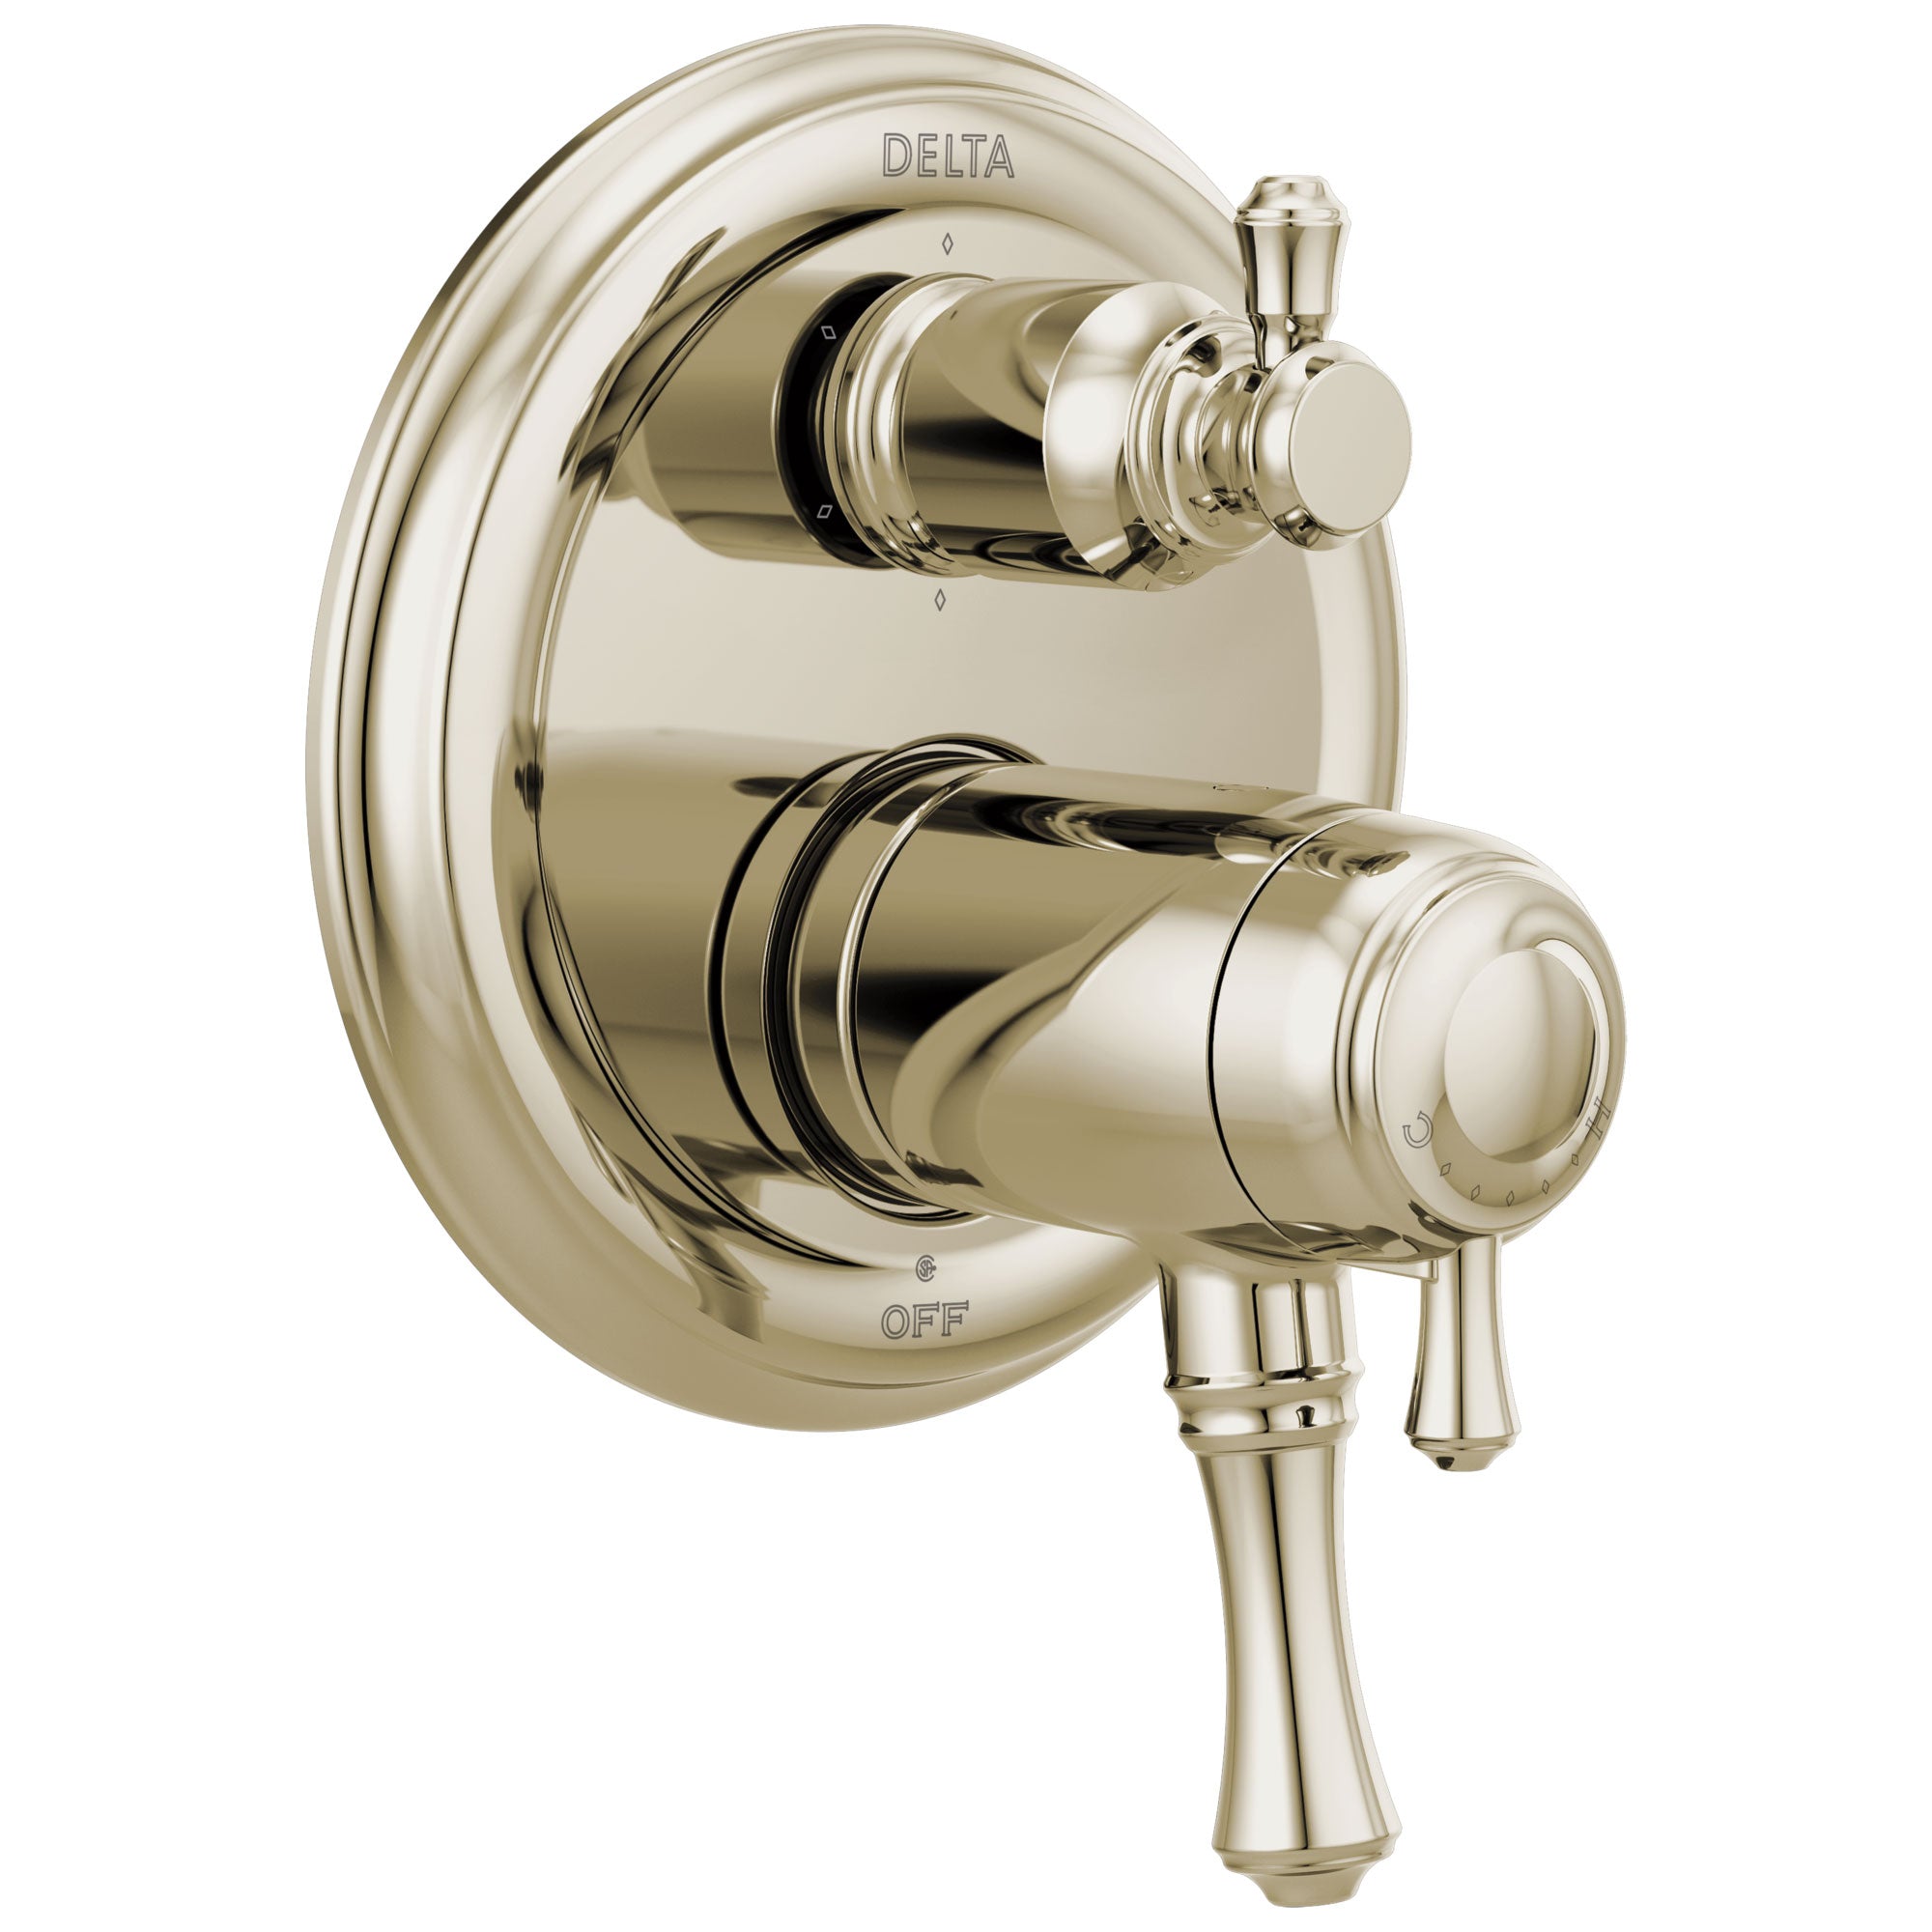 Delta Cassidy Polished Nickel Finish Thermostatic 17T Shower System Control with 6-Setting Integrated Diverter Includes Rough Valve and Handles D3071V